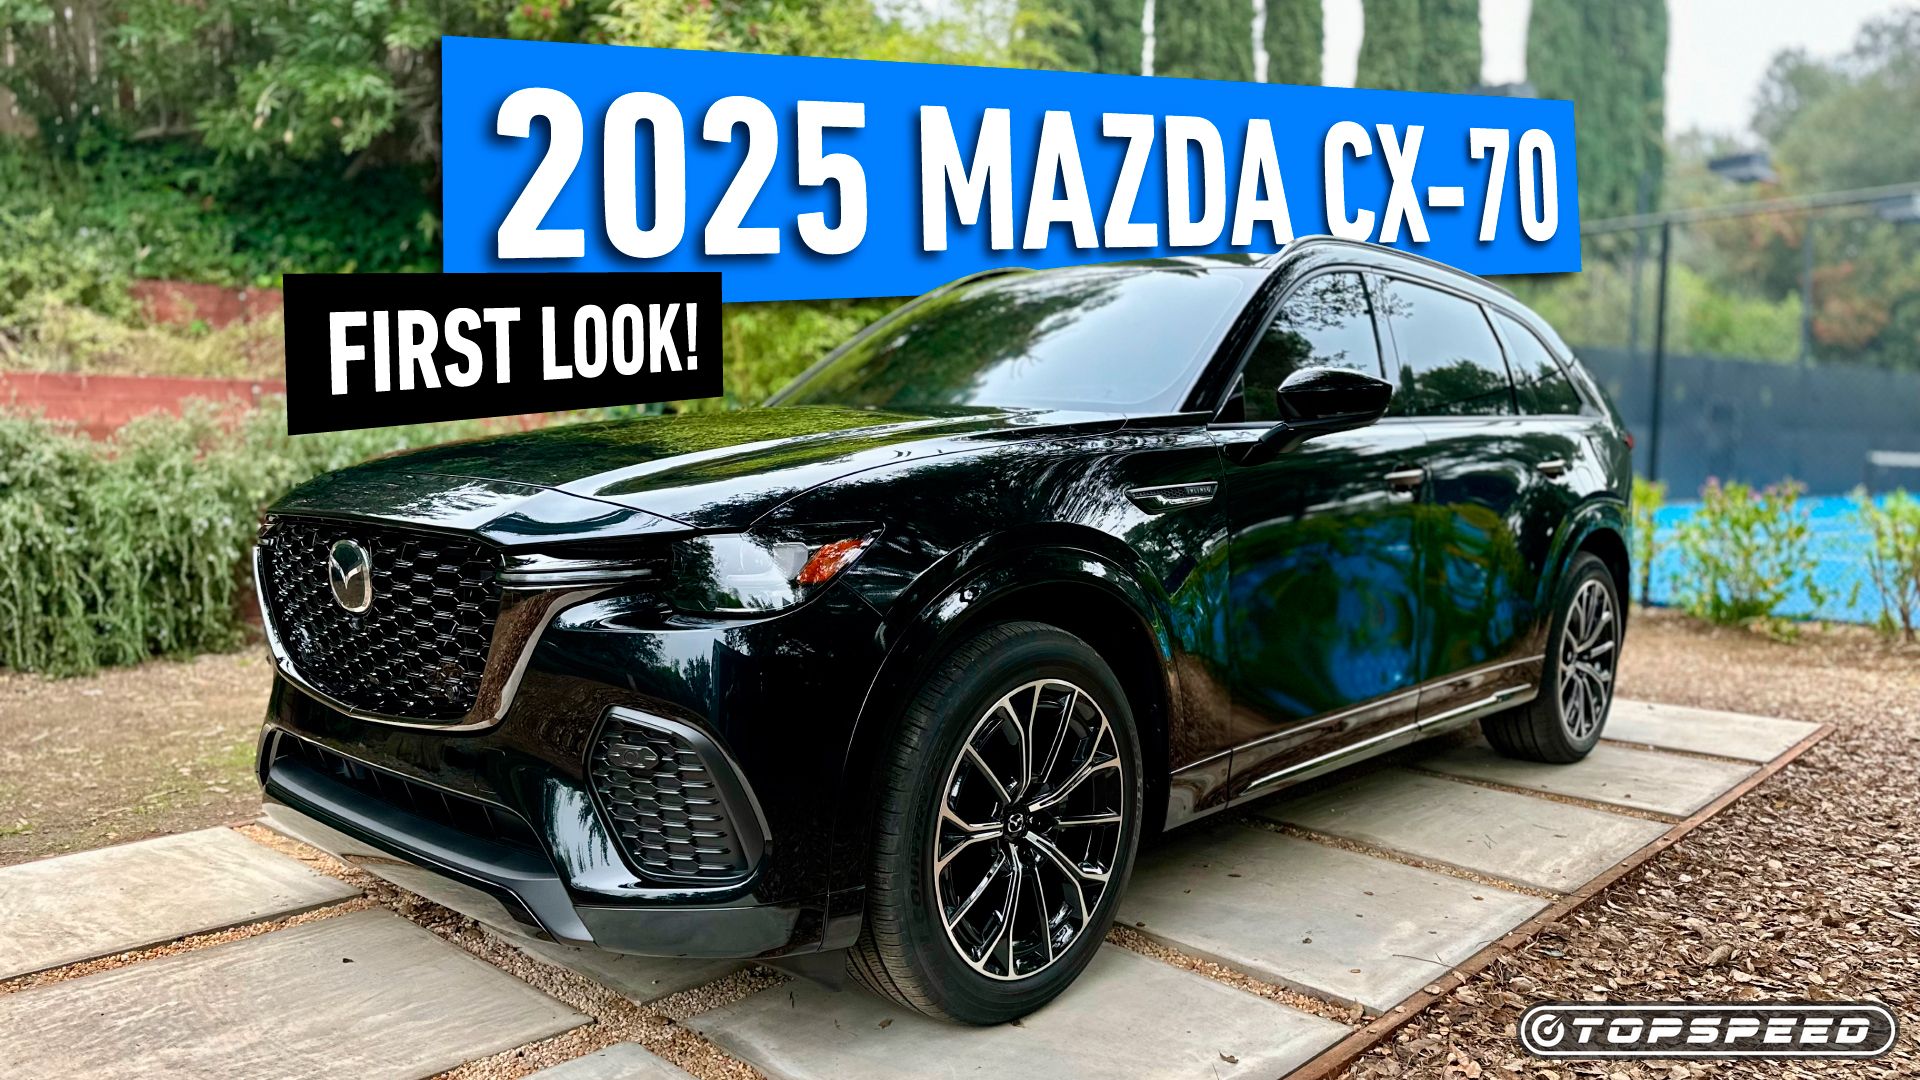 2025 Mazda CX-70 first look